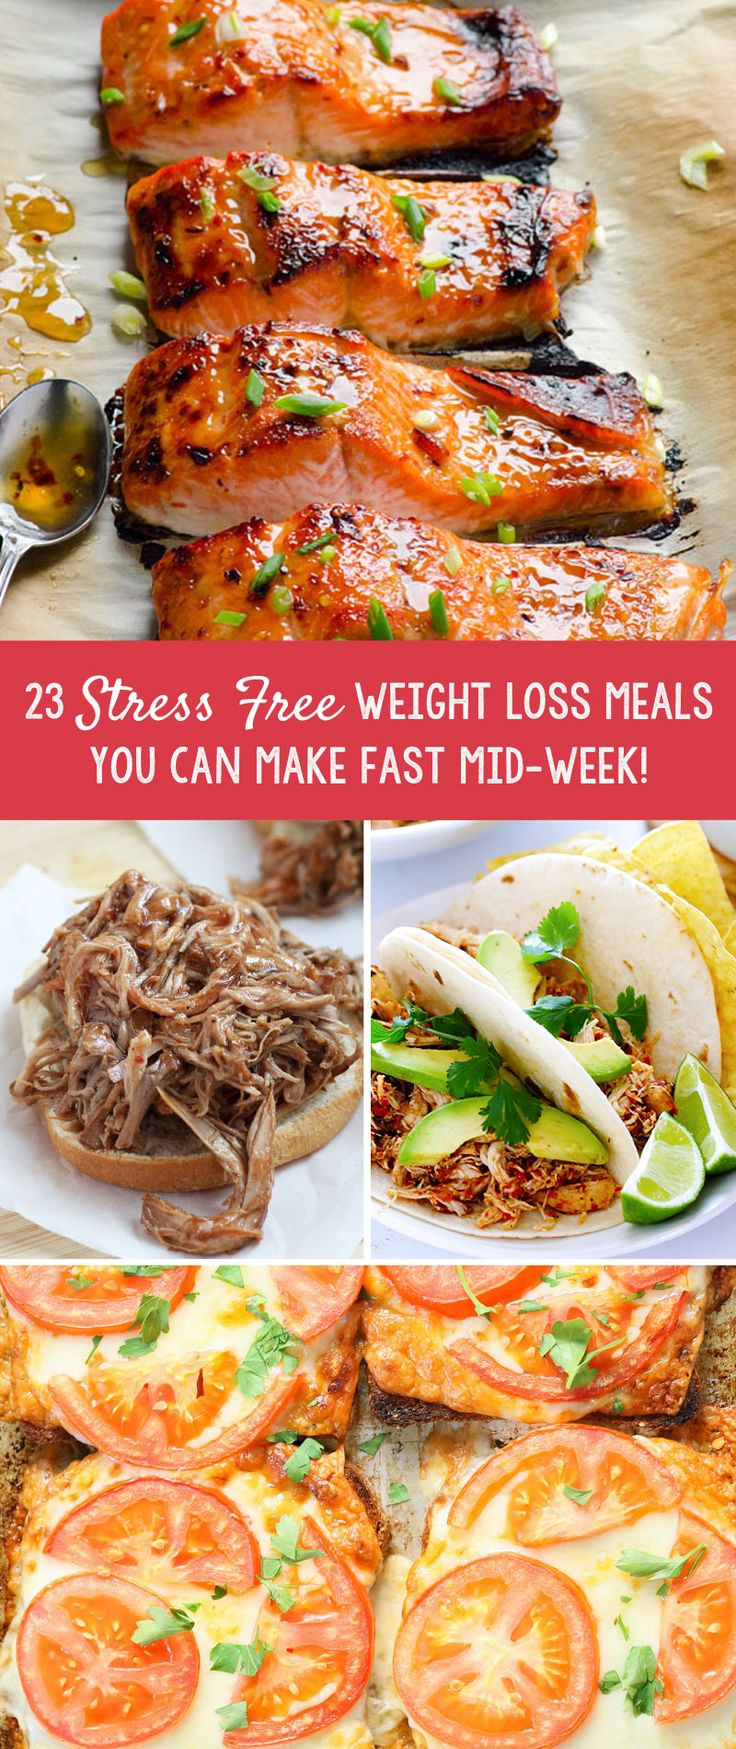 Quick Weight Loss Meals
 The 25 best Weight loss meals ideas on Pinterest